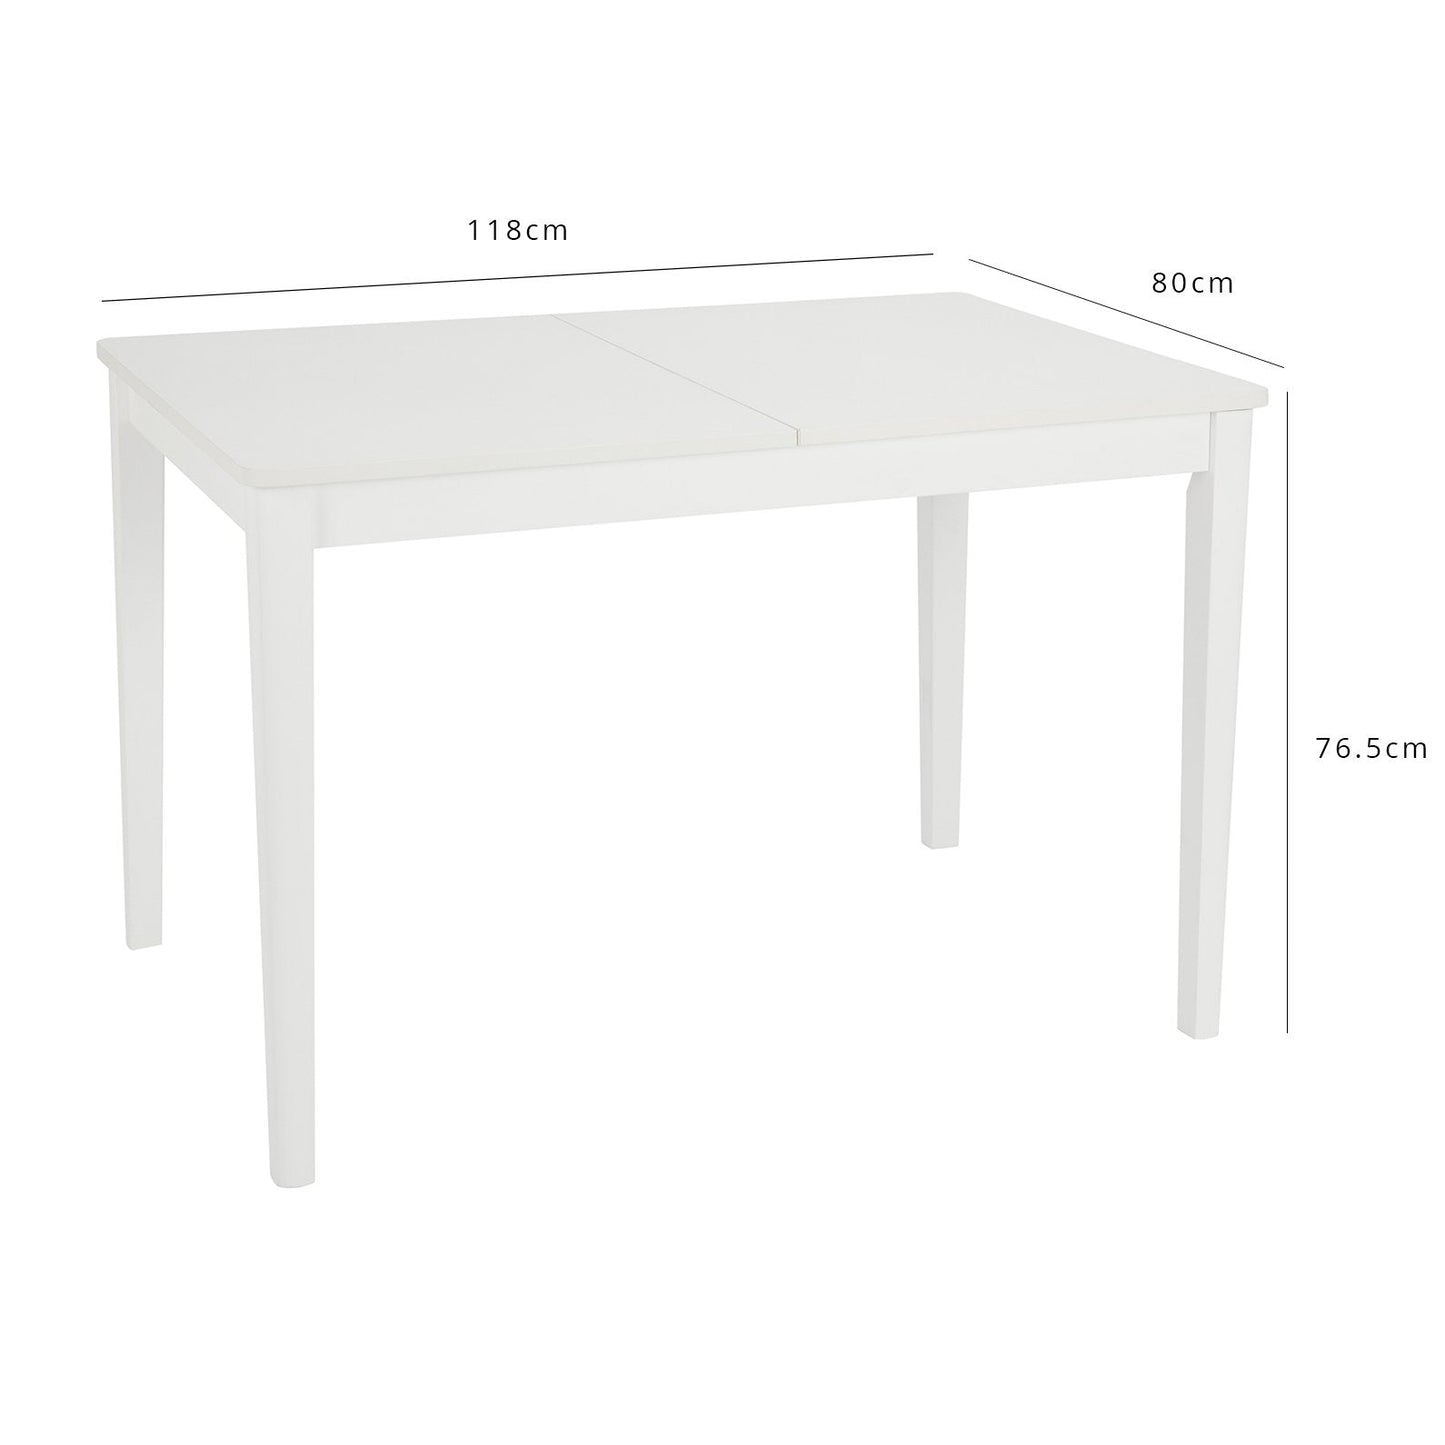 Paul extendable table with 6 chairs - large - white - Laura James